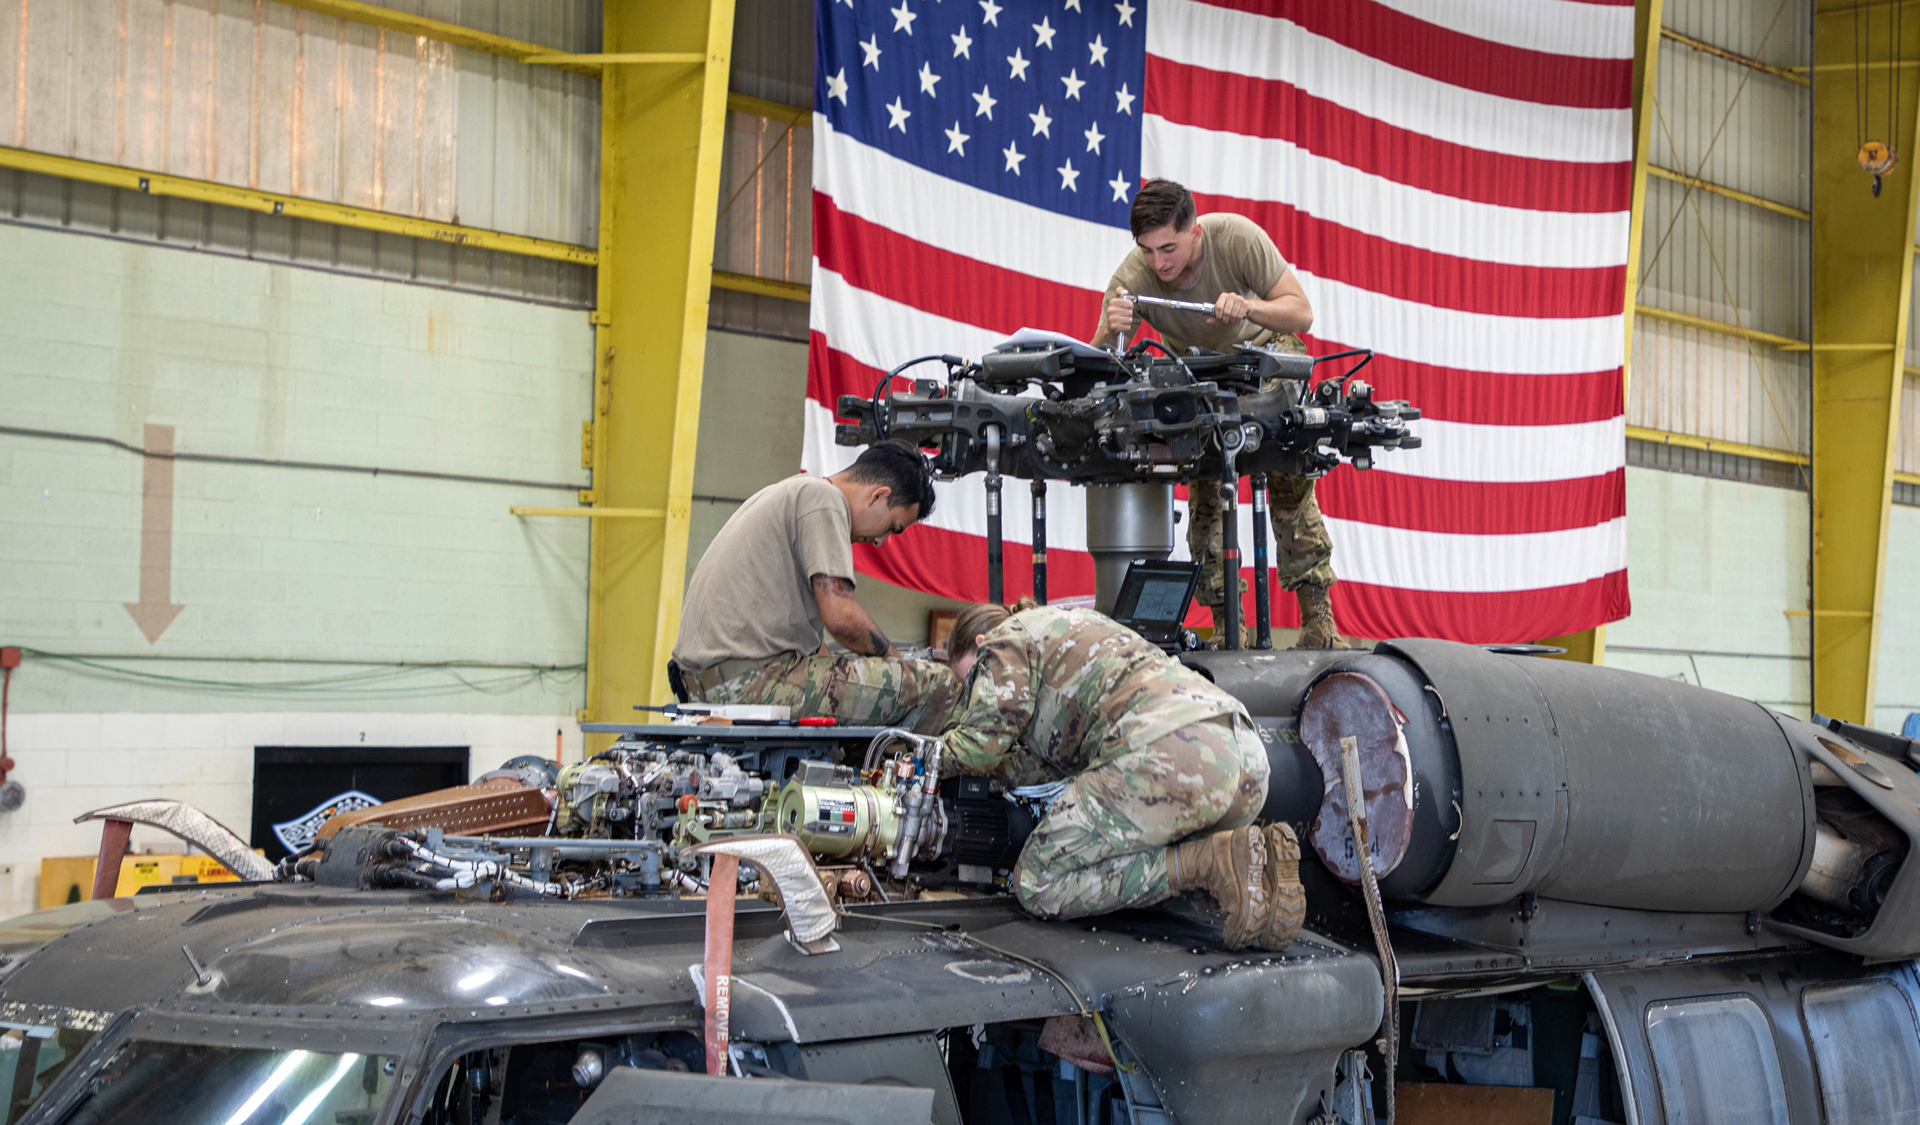 Maintainers perform repairs to a UH-60 Black Hawk at Wheeler Army Airfield, Hawaii, on March 4, 2021. The Network-enabled Analytics for Readiness initiative aims to improve aircraft readiness. (U.S. Army Photo/Sgt. Sarah D. Sangster) 